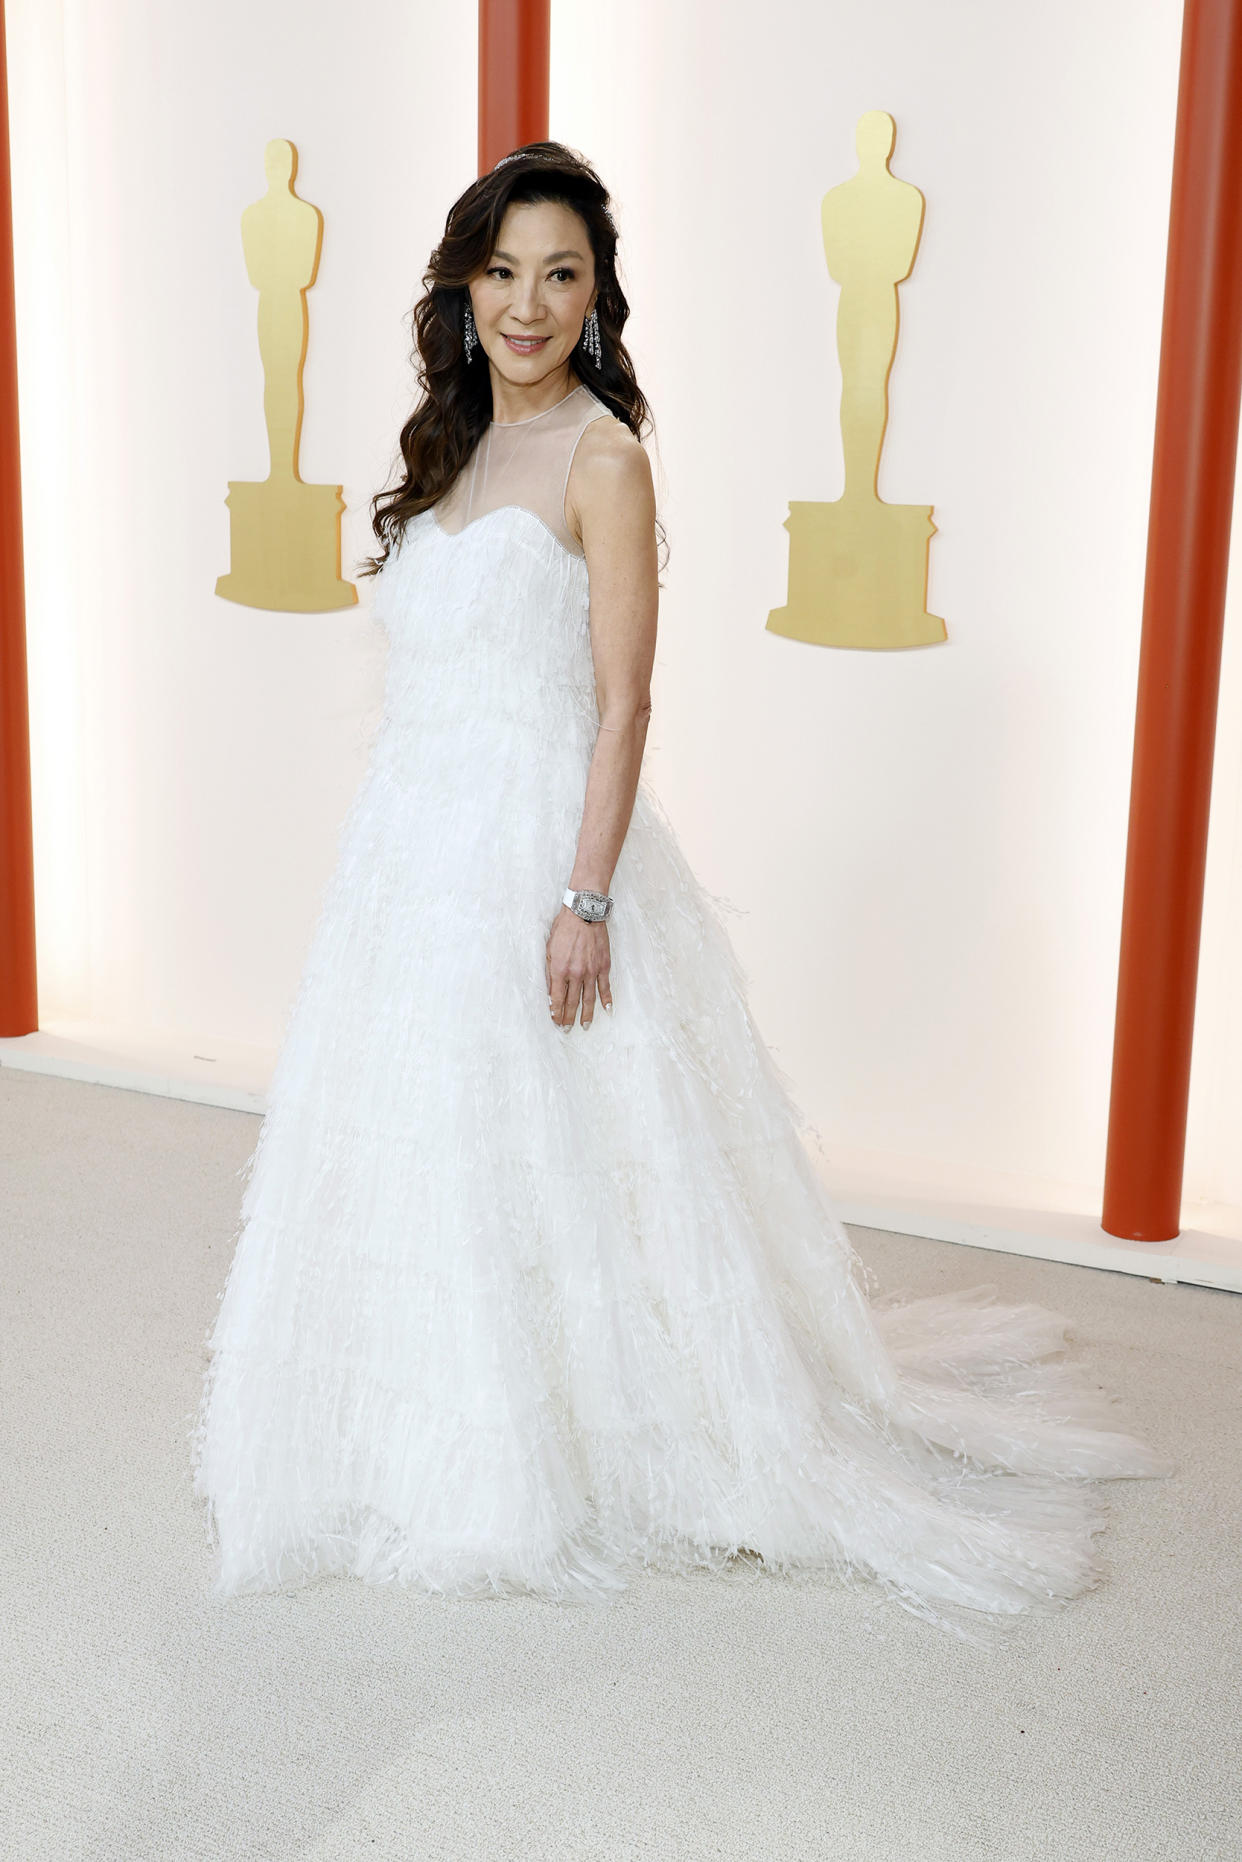 Image: 95th Annual Academy Awards - Arrivals (Mike Coppola / Getty Images)